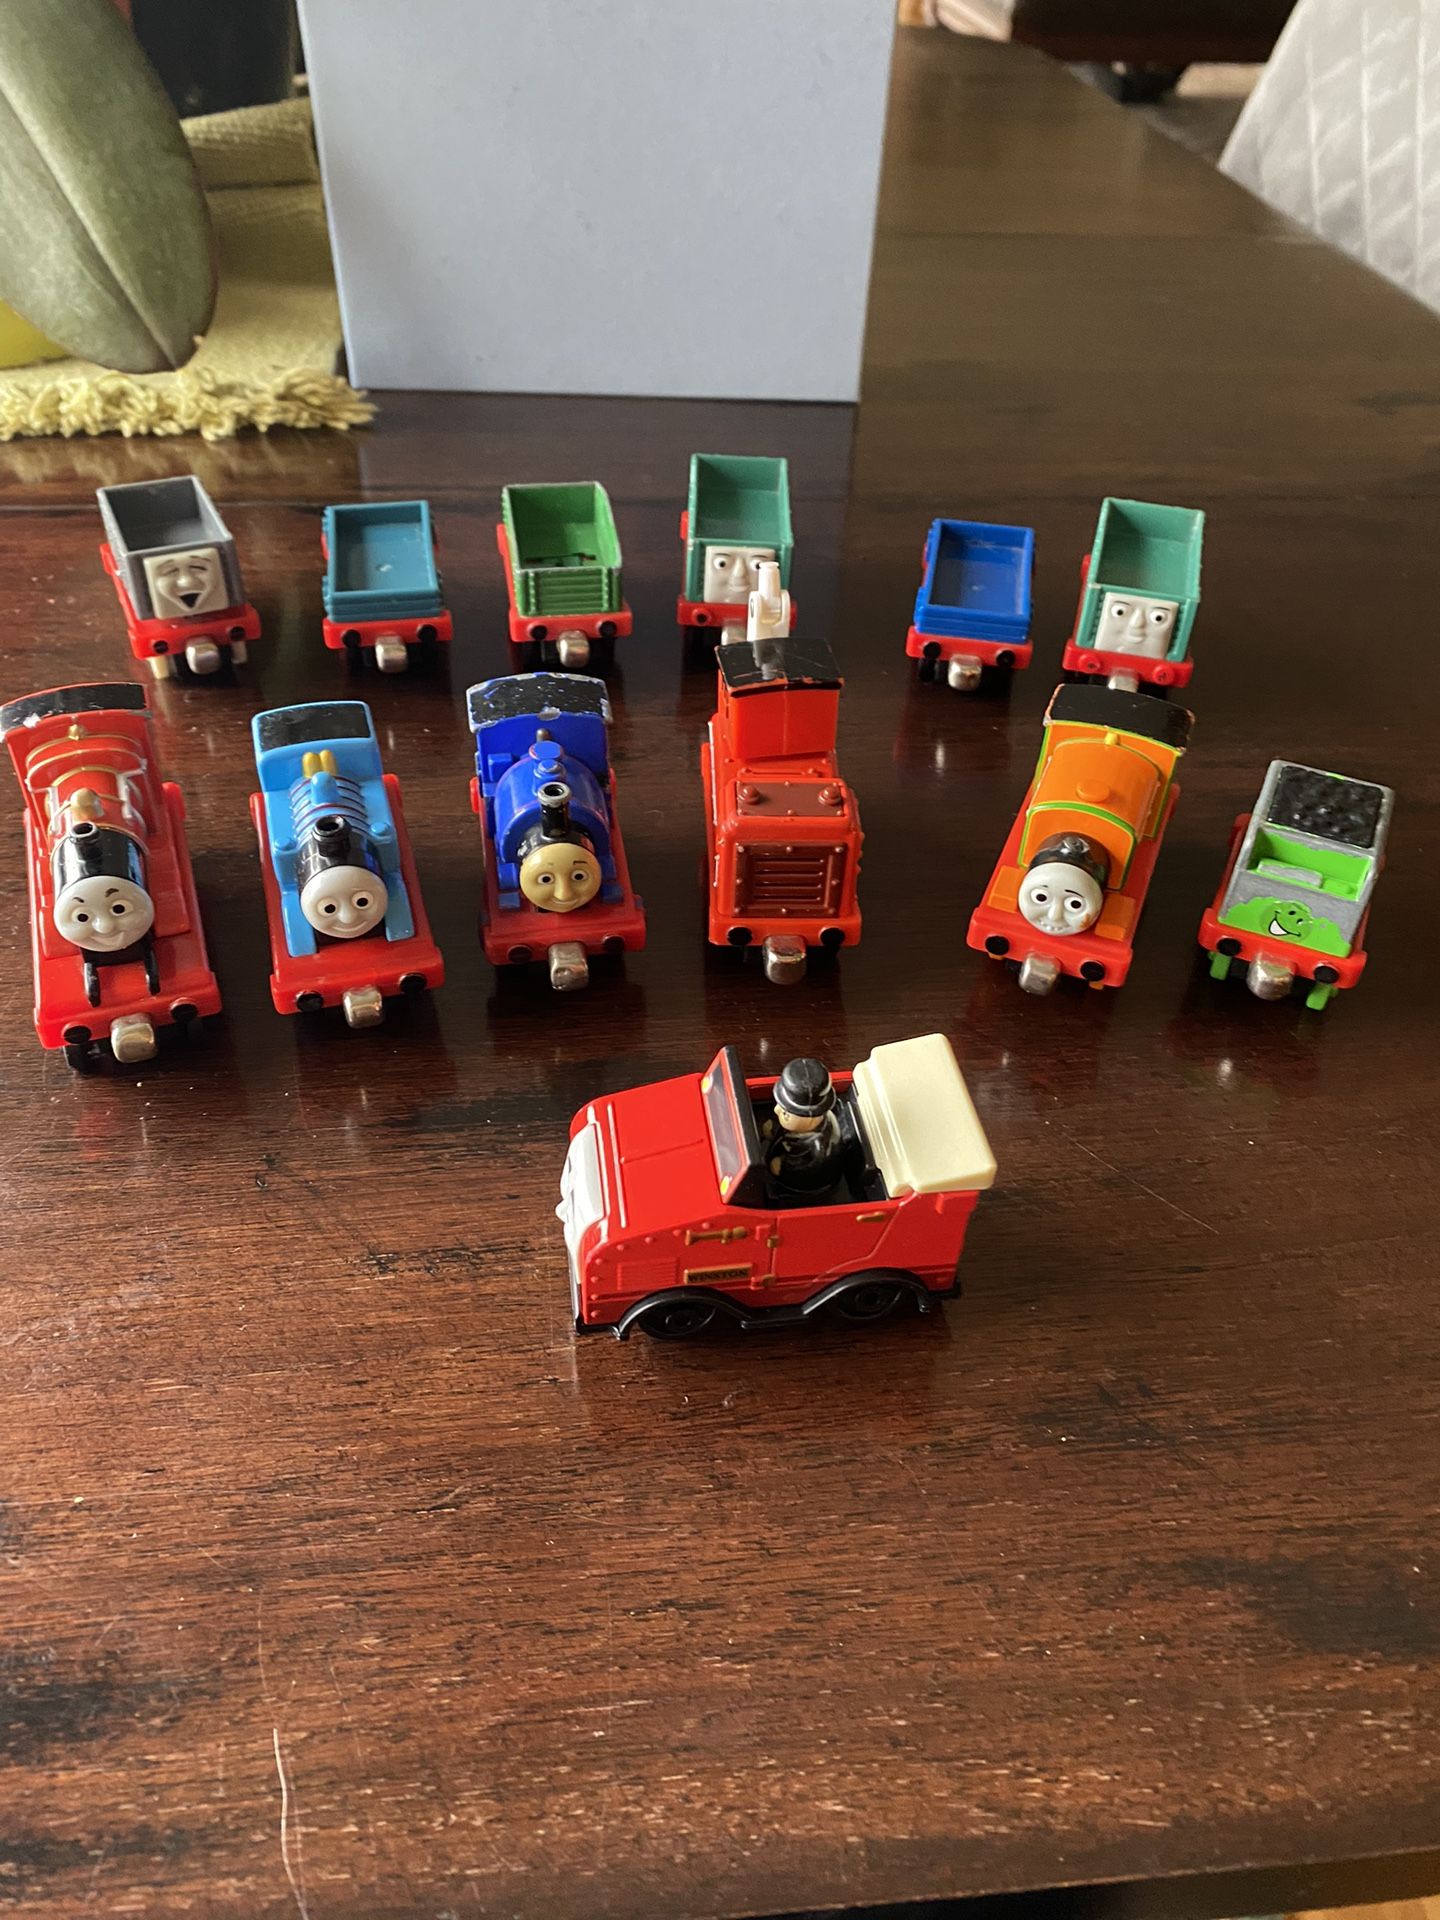 Lot Of 13 Thomas The Train Metal Trains And Winston The Car With Sir Topham